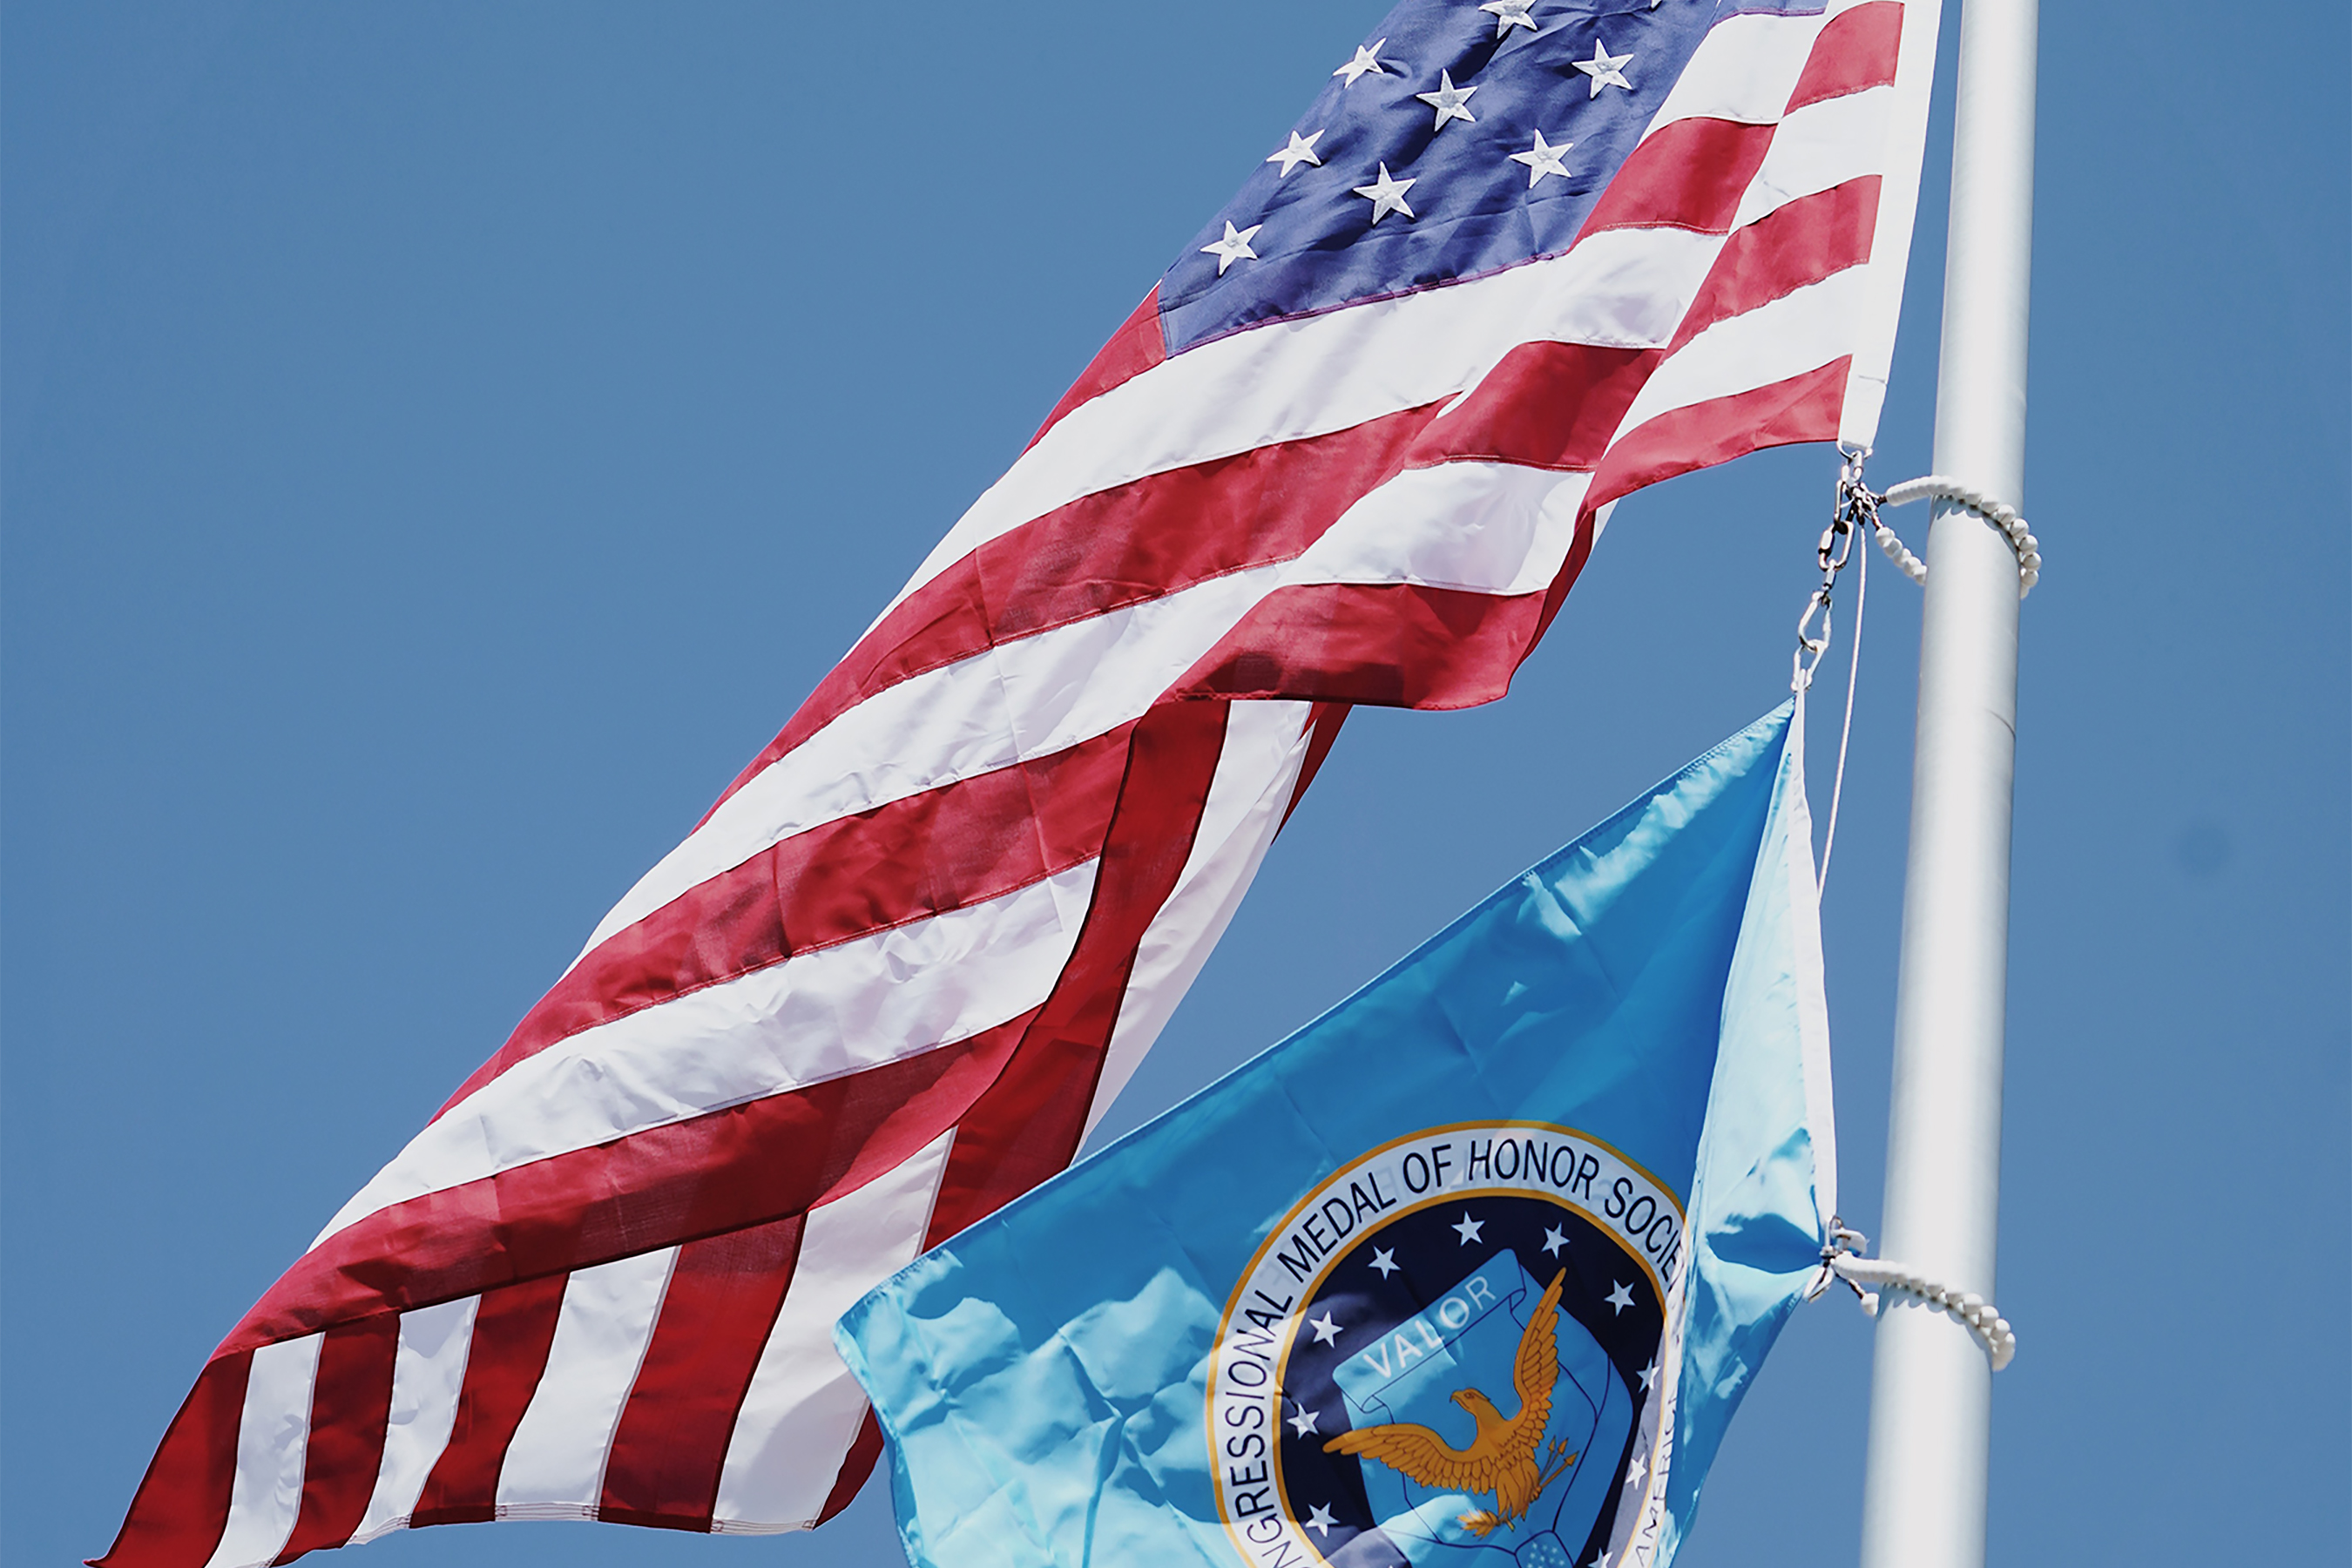 Congressional Medal of Honor Society flag